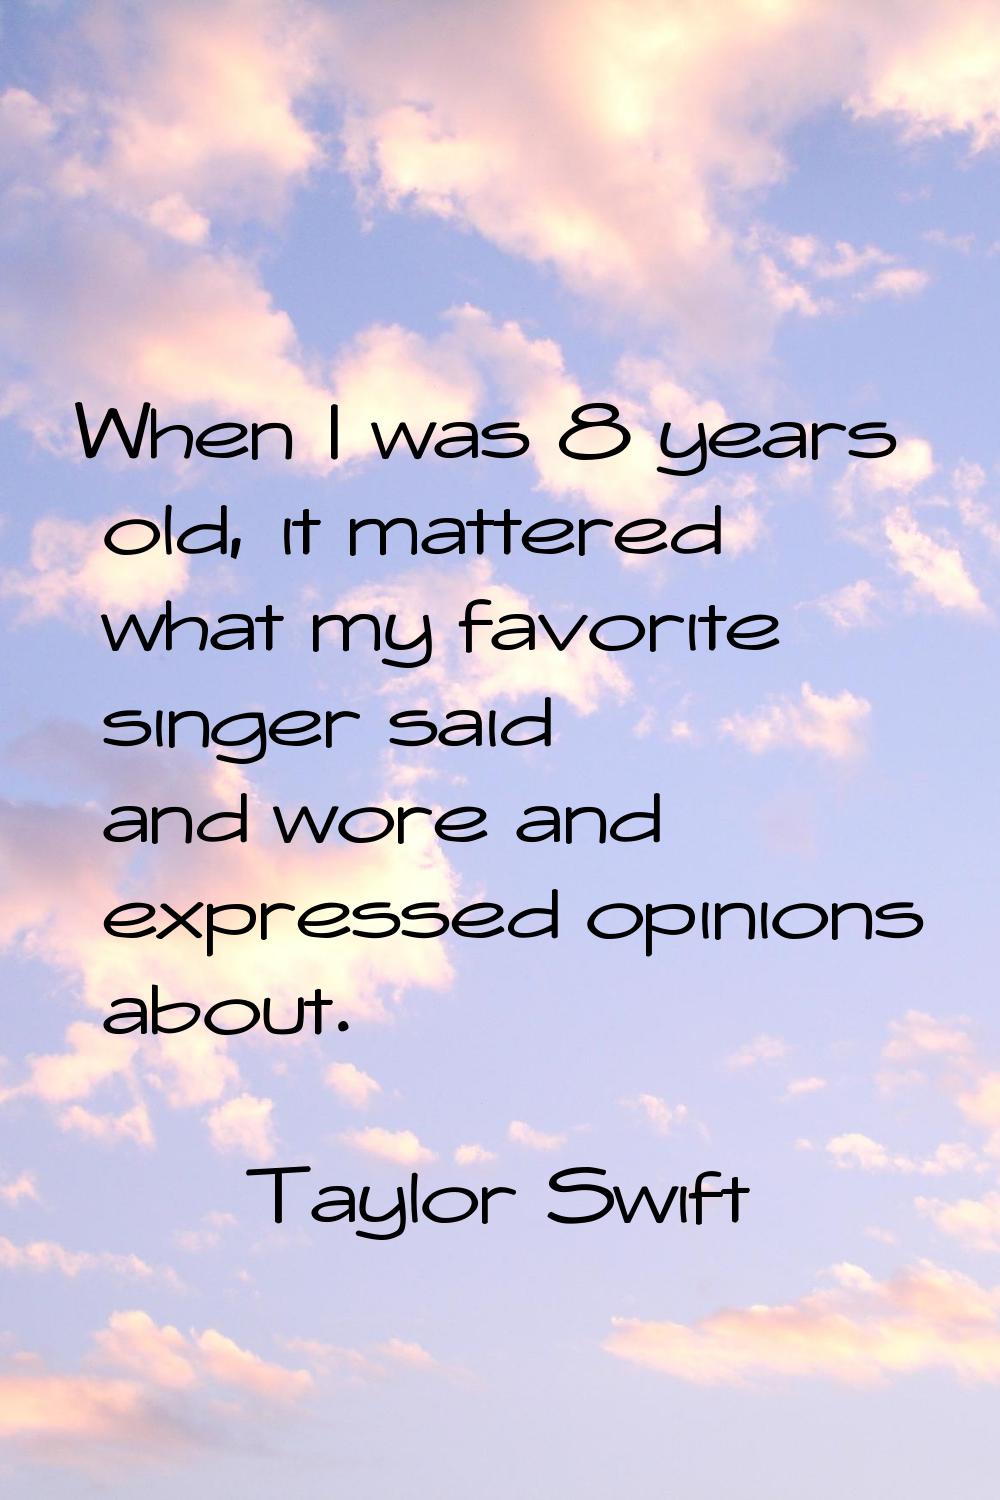 When I was 8 years old, it mattered what my favorite singer said and wore and expressed opinions ab